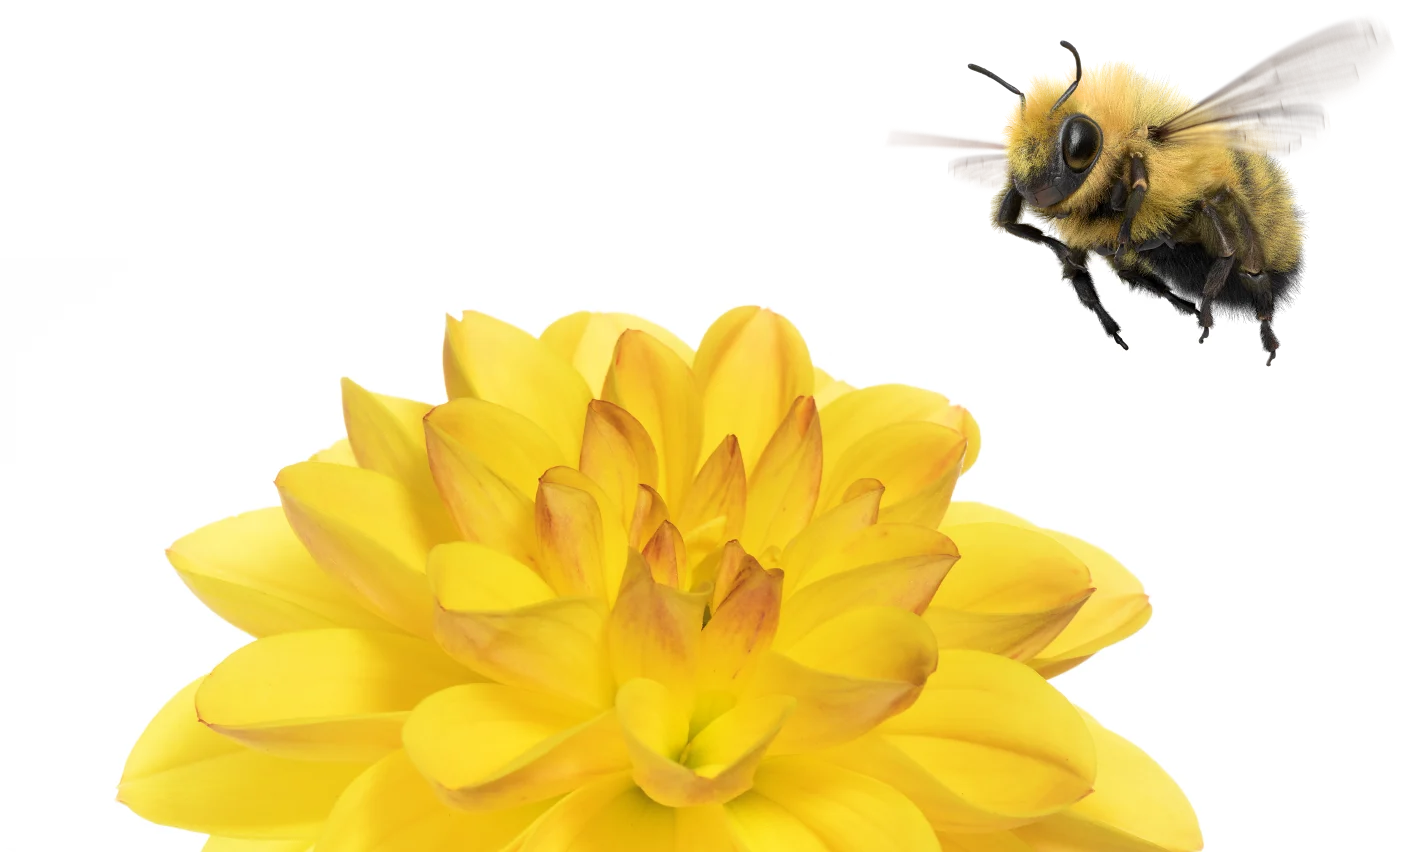 A bee flying above a yellow flower.